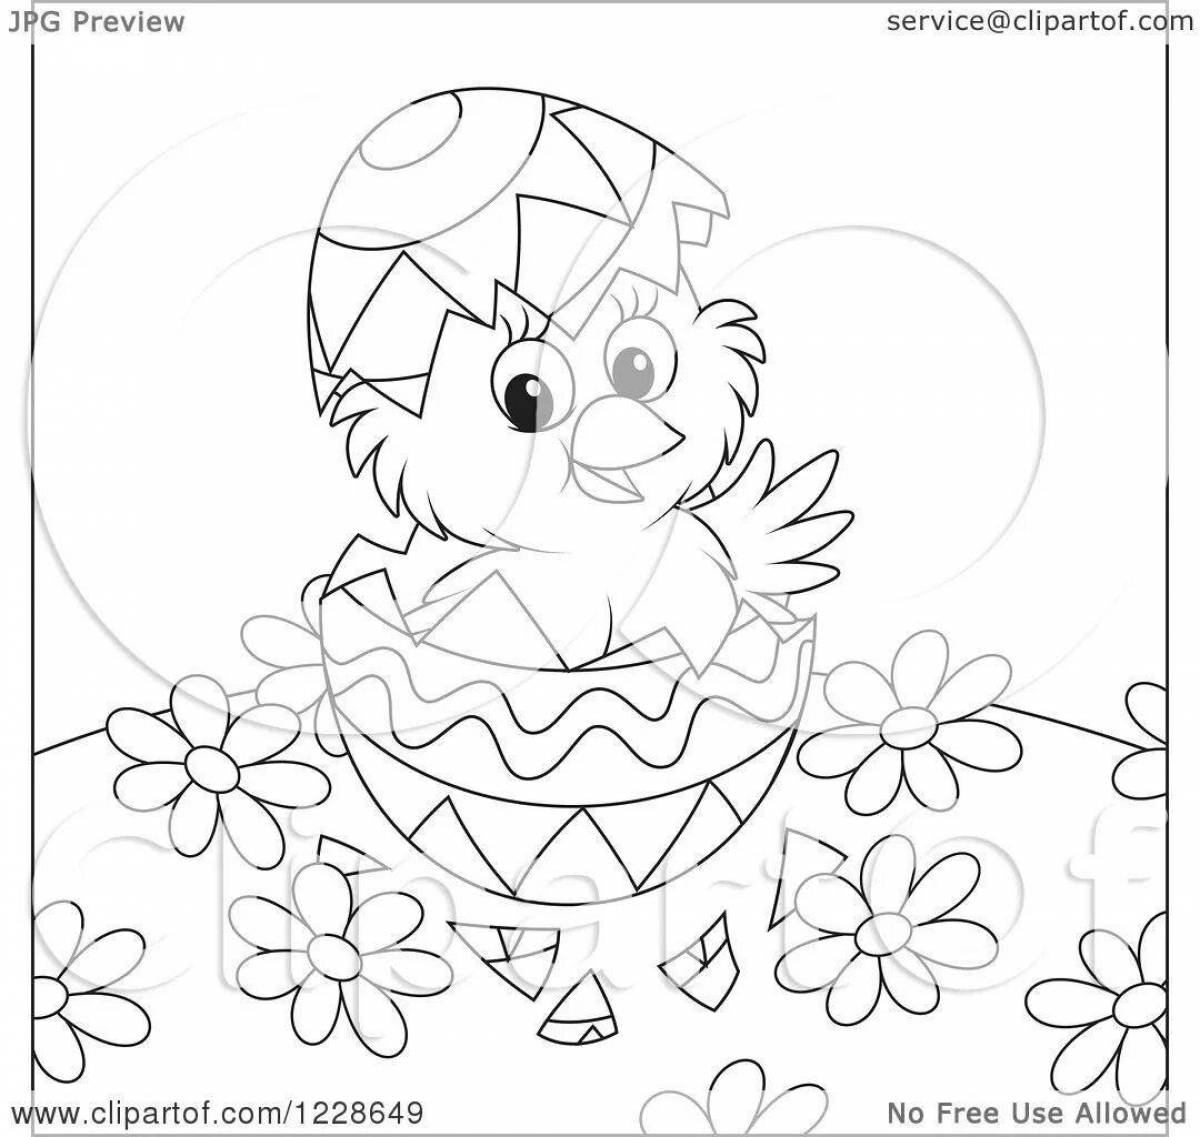 Gourmet chicken in egg coloring page